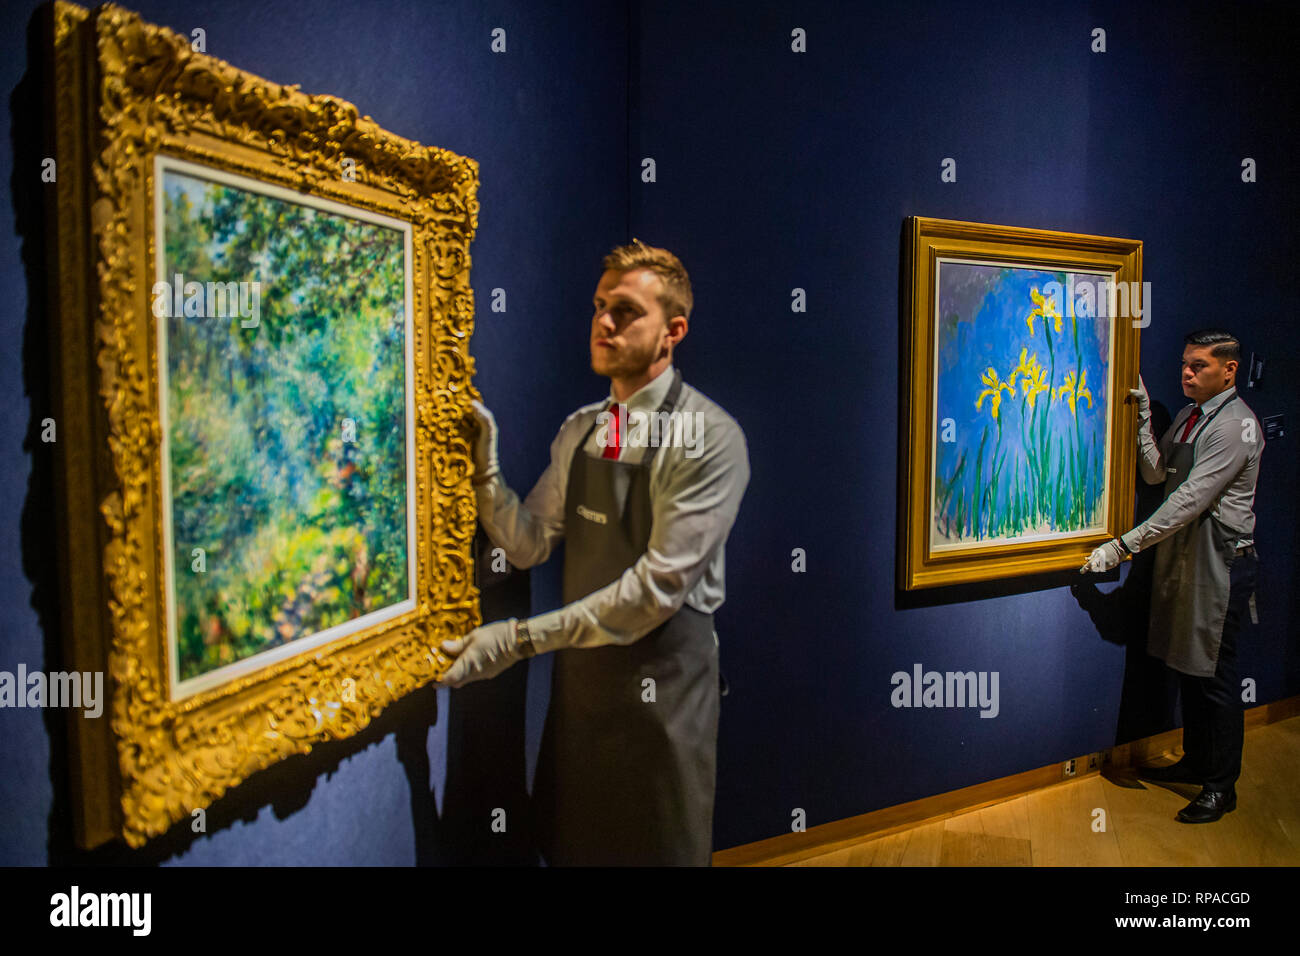 London, UK. 21st Feb, 2019. Claude Monet (1840-1926) Iris, est £4-6m (r) - Christie’s presents an exhibition of works from its upcoming Impressionist & Modern Art and The Art Of The Surreal Sales which will take place on 27 Feb at Christie’s King Street. Credit: Guy Bell/Alamy Live News Stock Photo